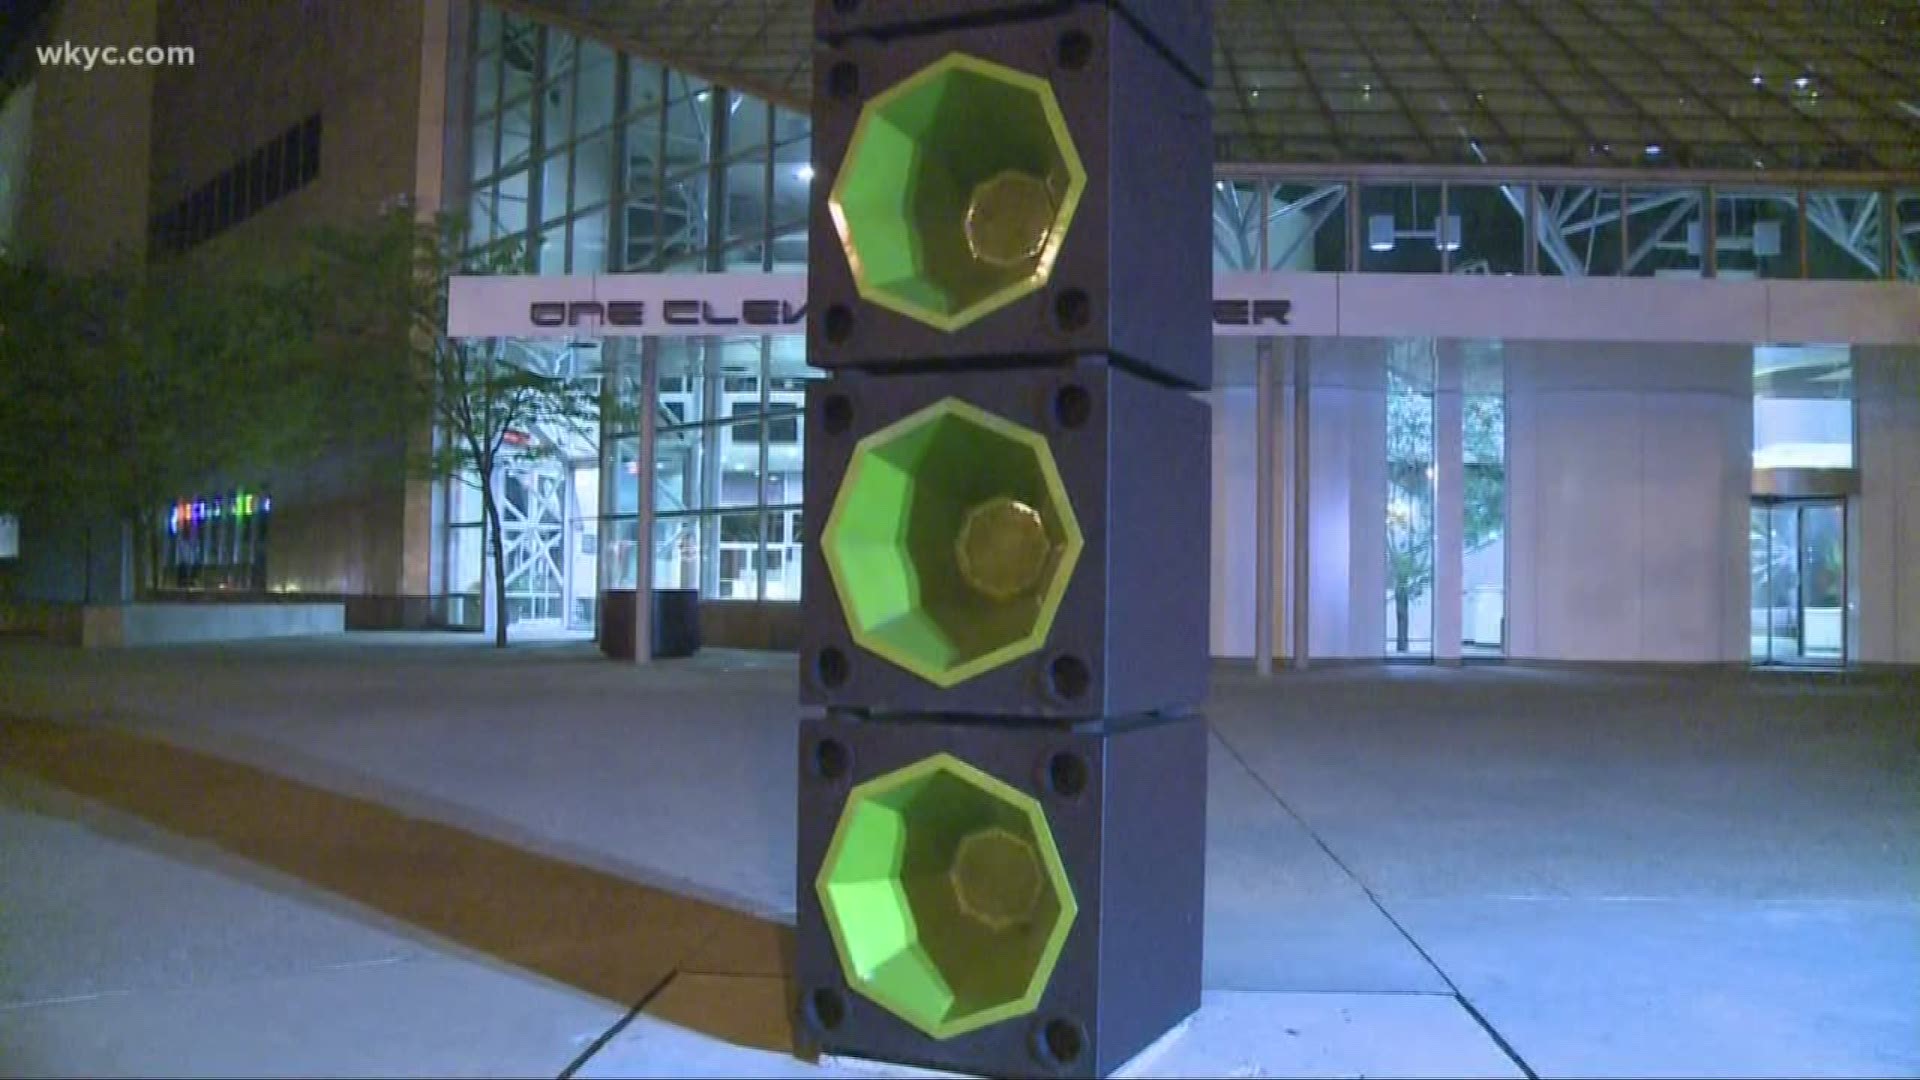 May 21, 2019: Police say they received several complaints overnight as 'rock box' speakers from the Rock and Roll Hall of Fame were blasting music loudly throughout the night.